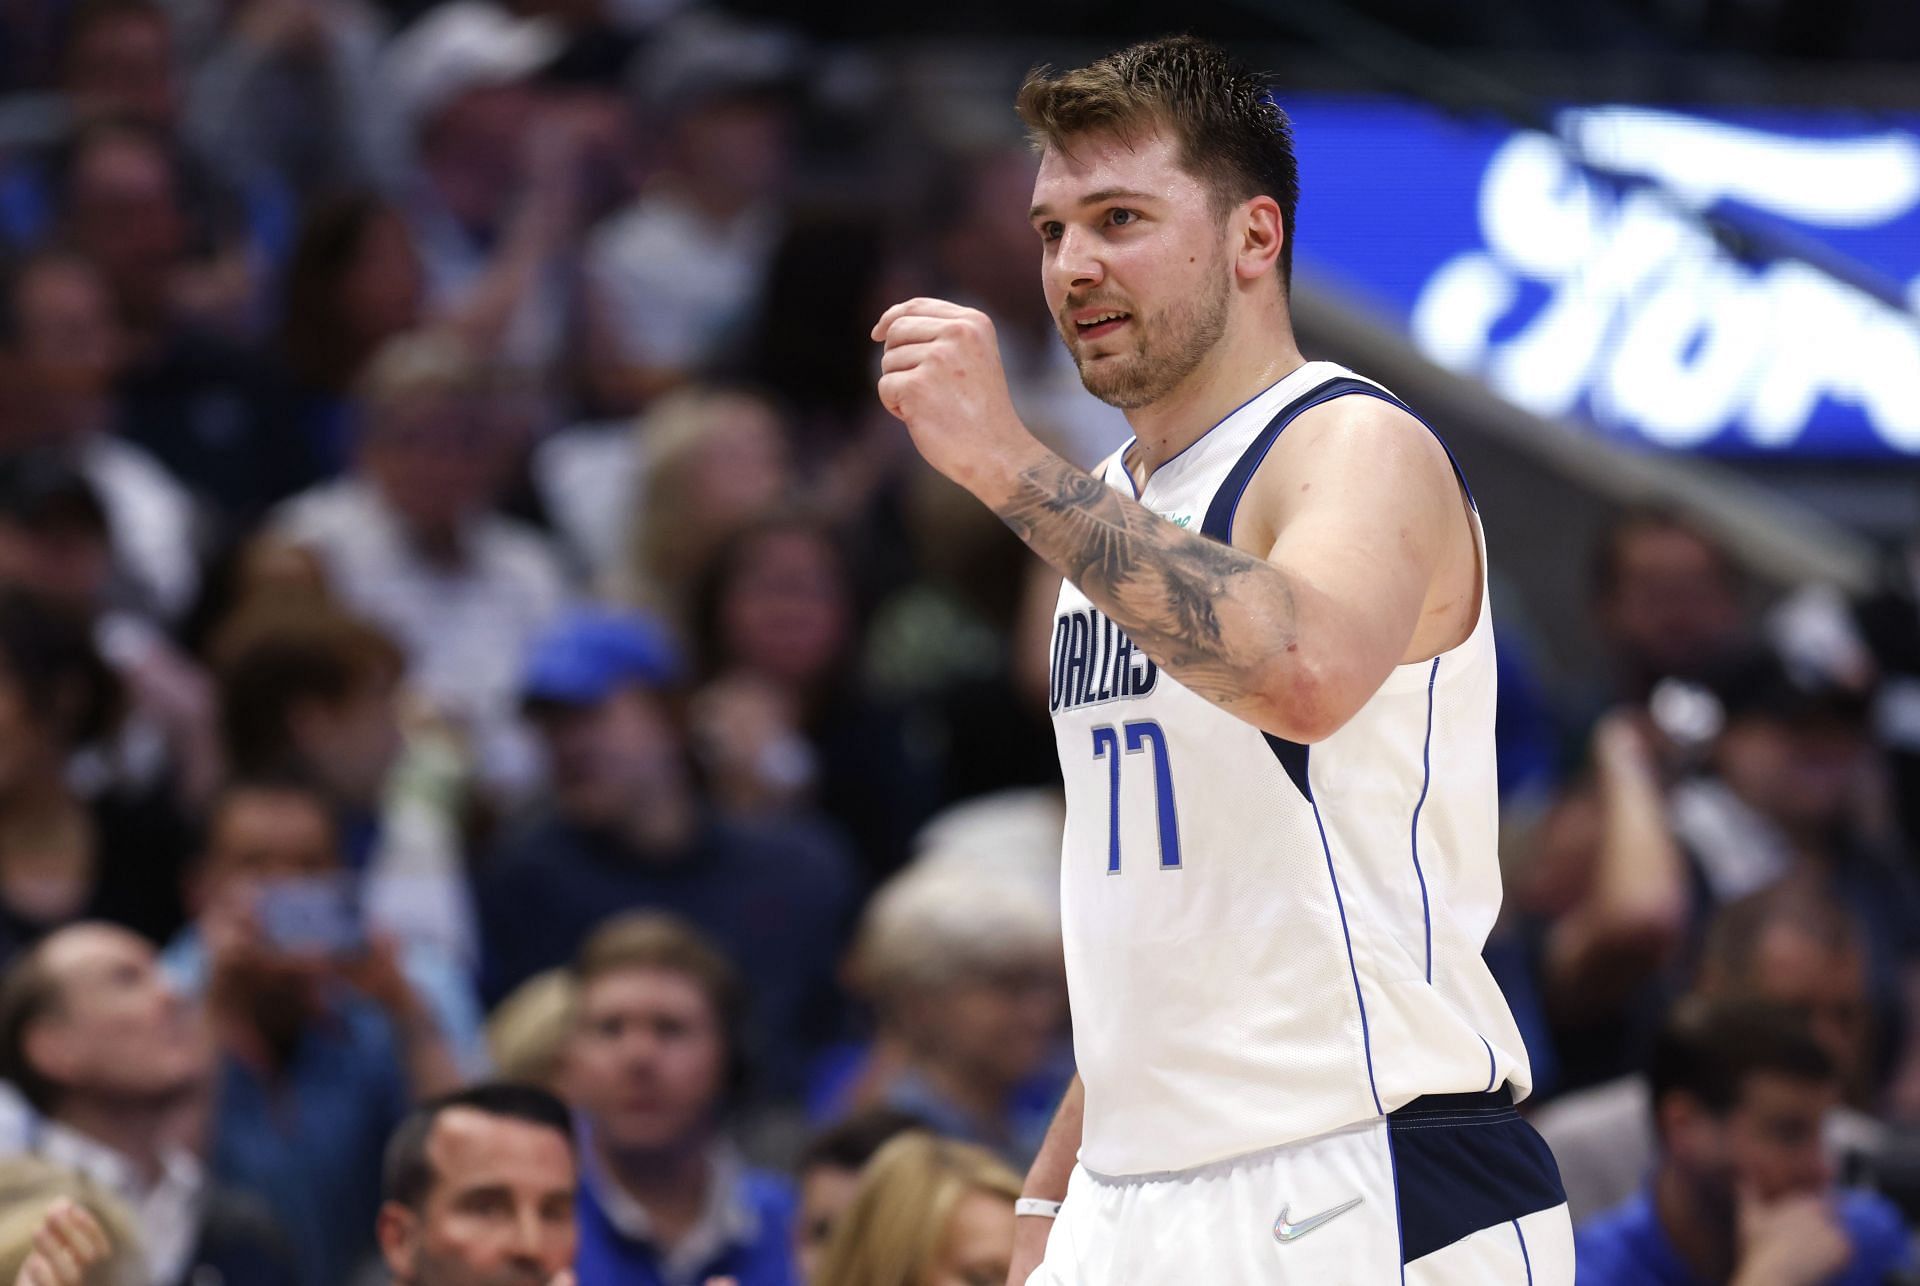 Luka Doncic of the Dallas Mavericks in the Western Conference Semifinals